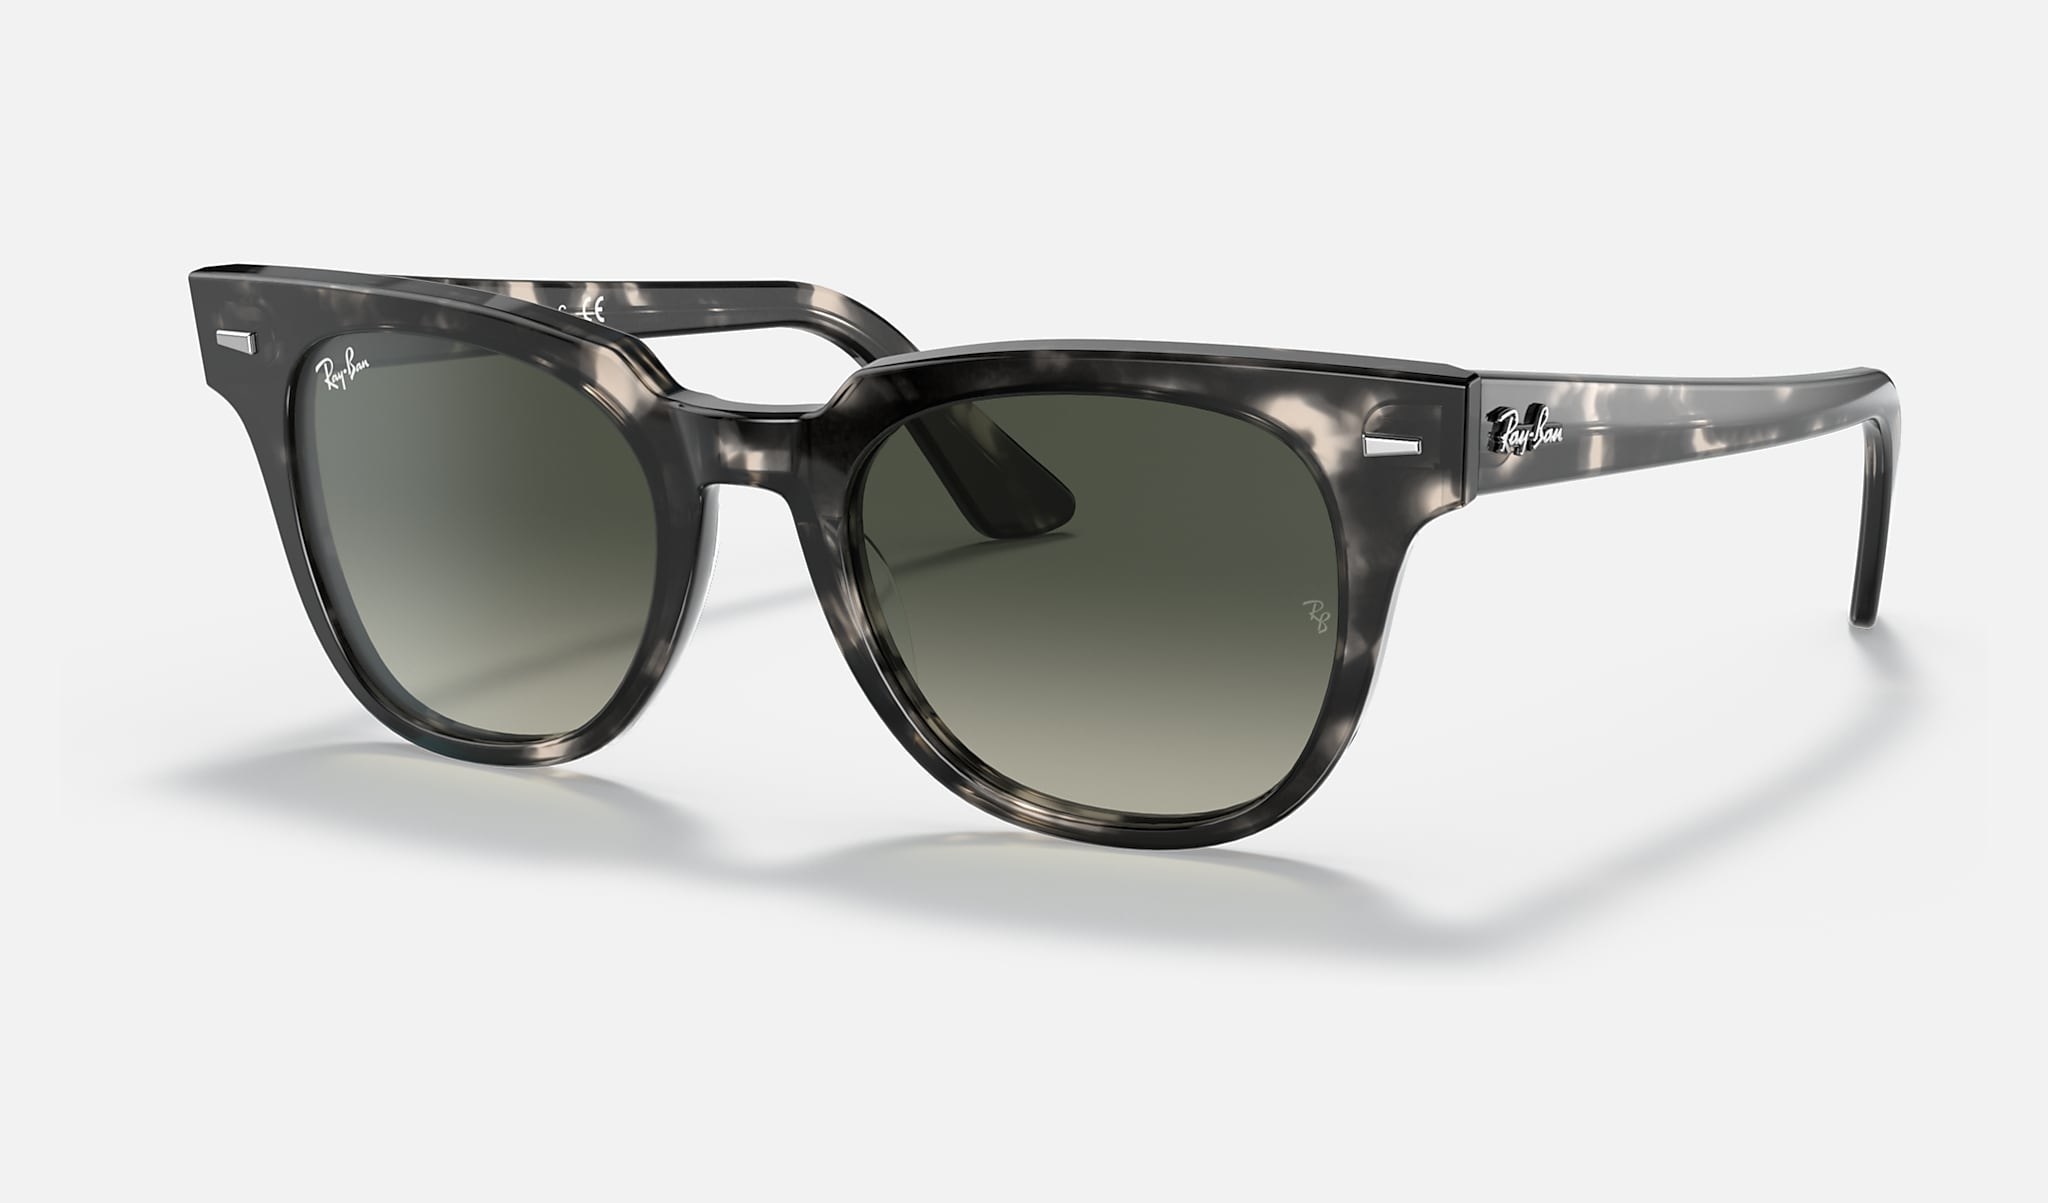 the black and white speckled wayfarers